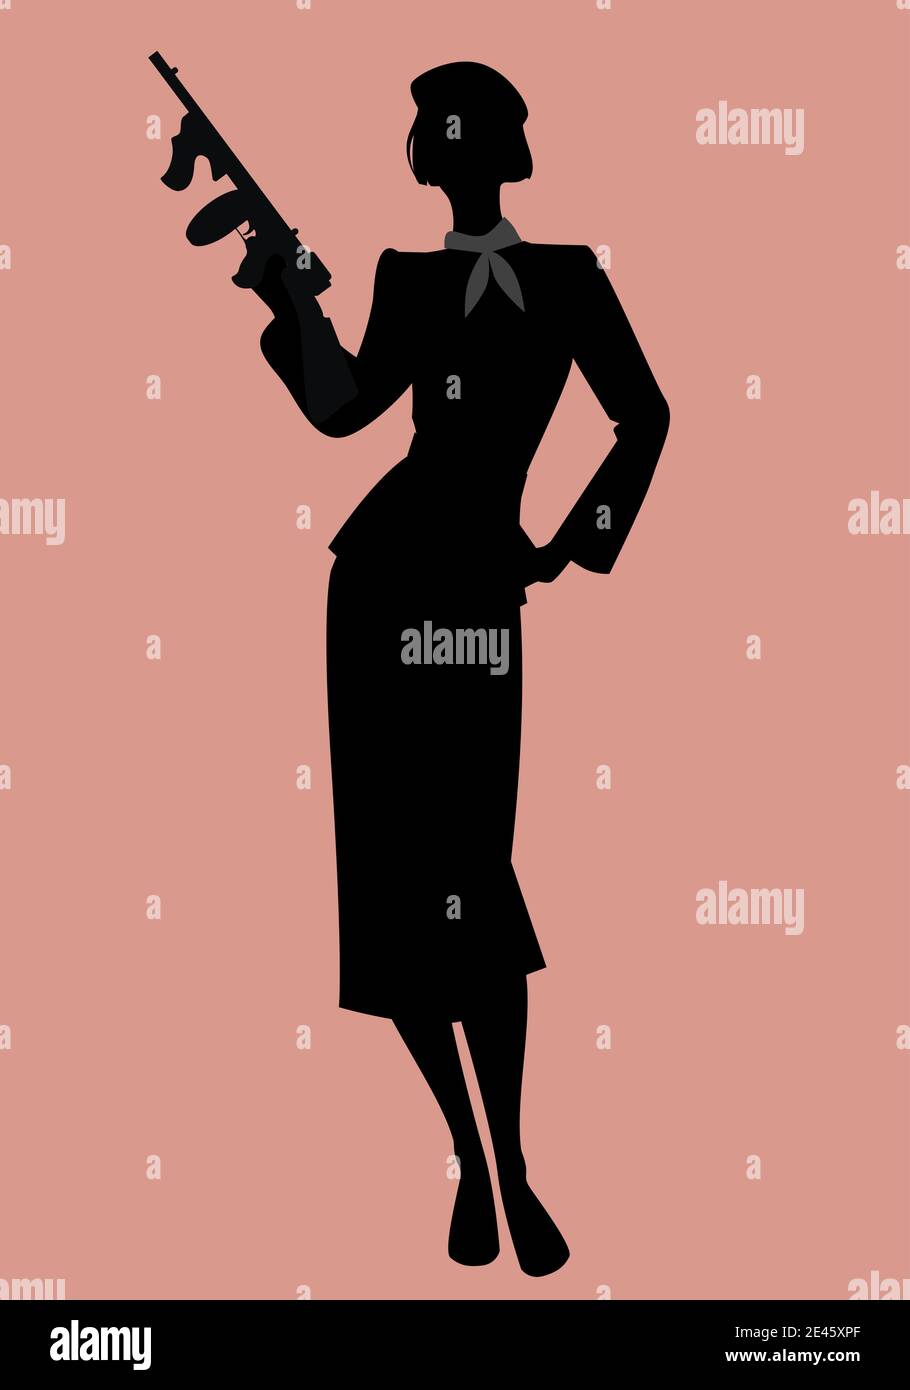 Elegant silhouette of a lady in the retro style of the 1920s or 1930s, wearing a beret and armed with a submachine gun Stock Vector